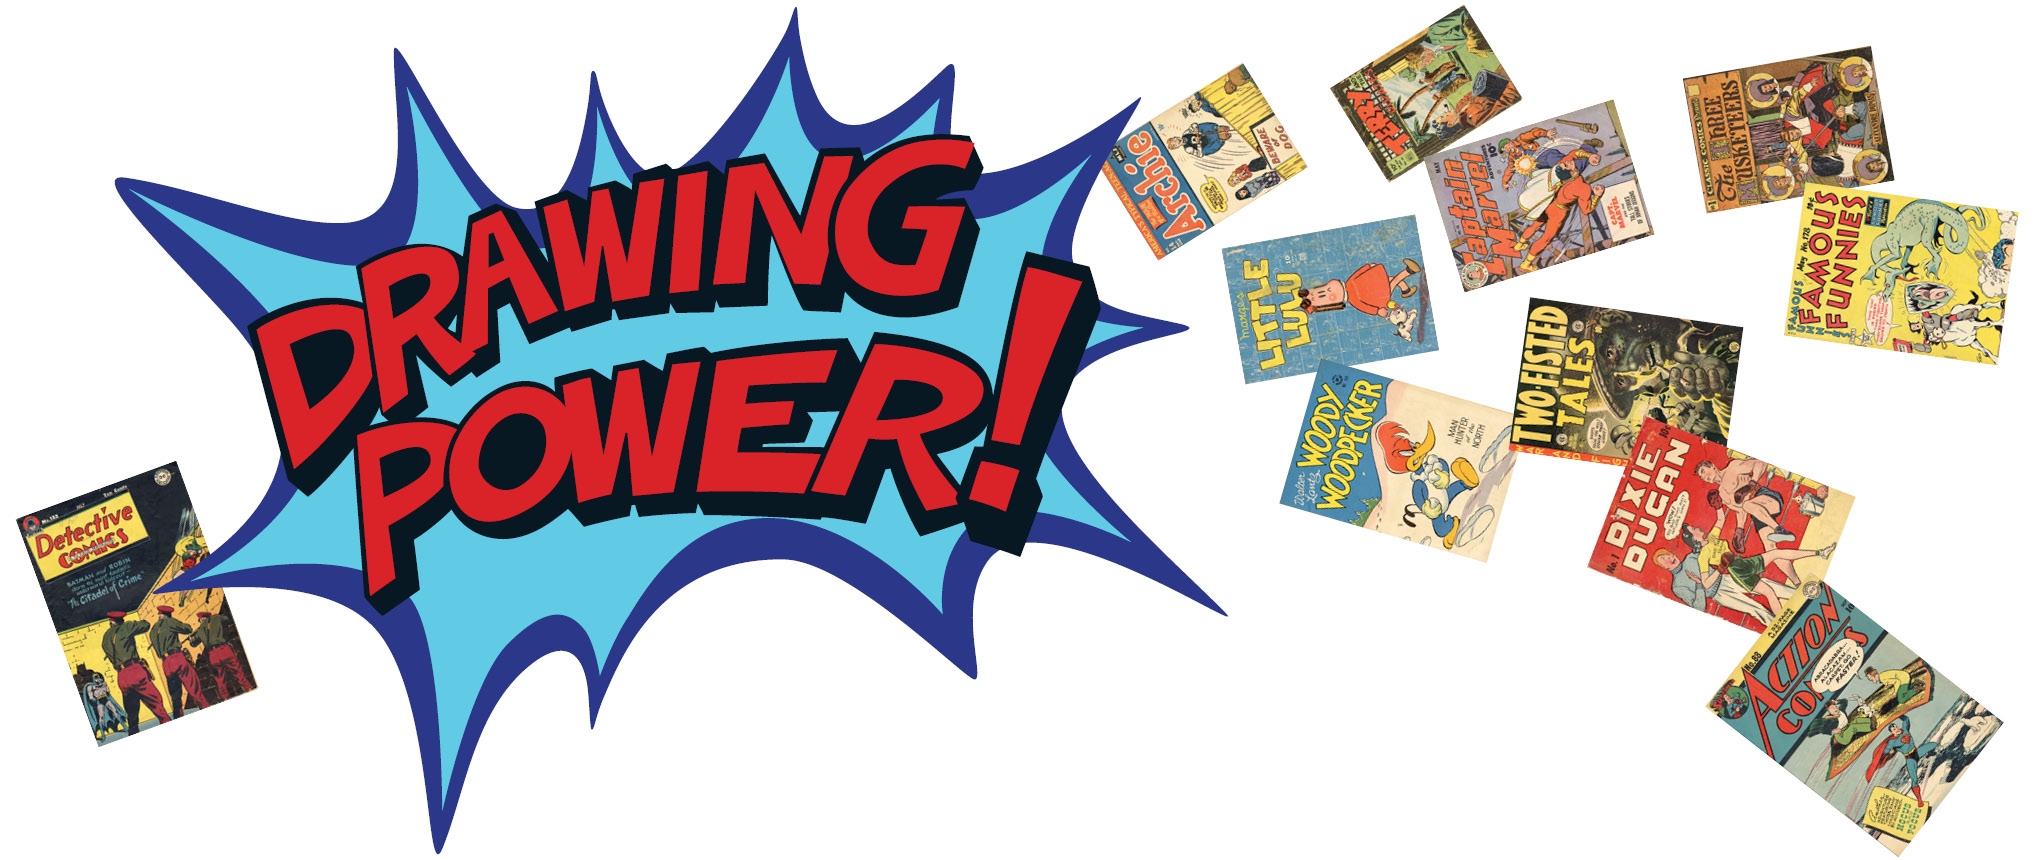 Action word bubble saying 'Drawing Power' with comic book art covers